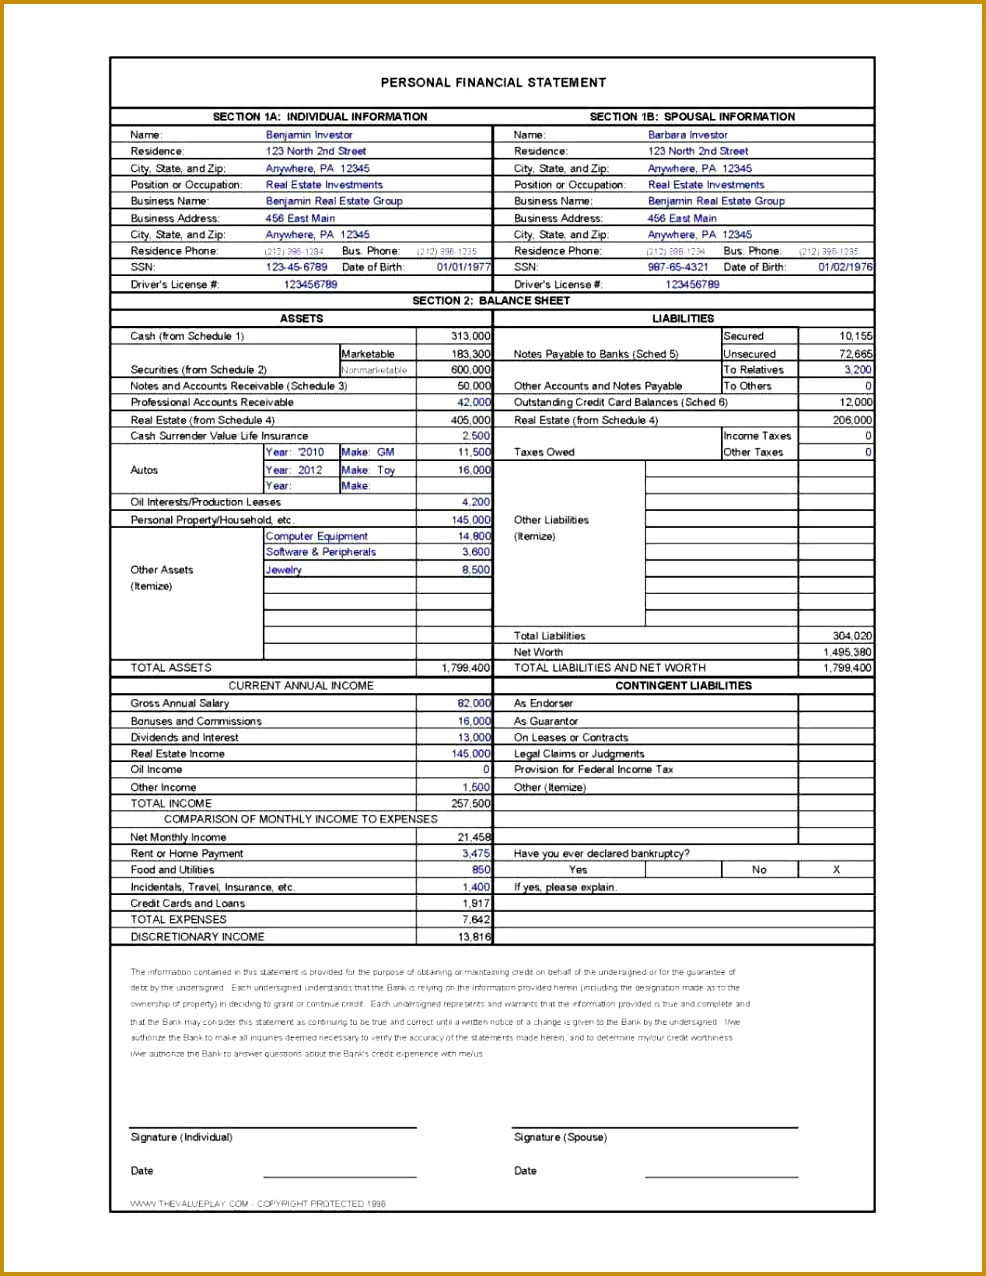 personal trust detailed statement statement template for Ifrs Financial Statements Template Excel business plan example real estate financial statement 1276986